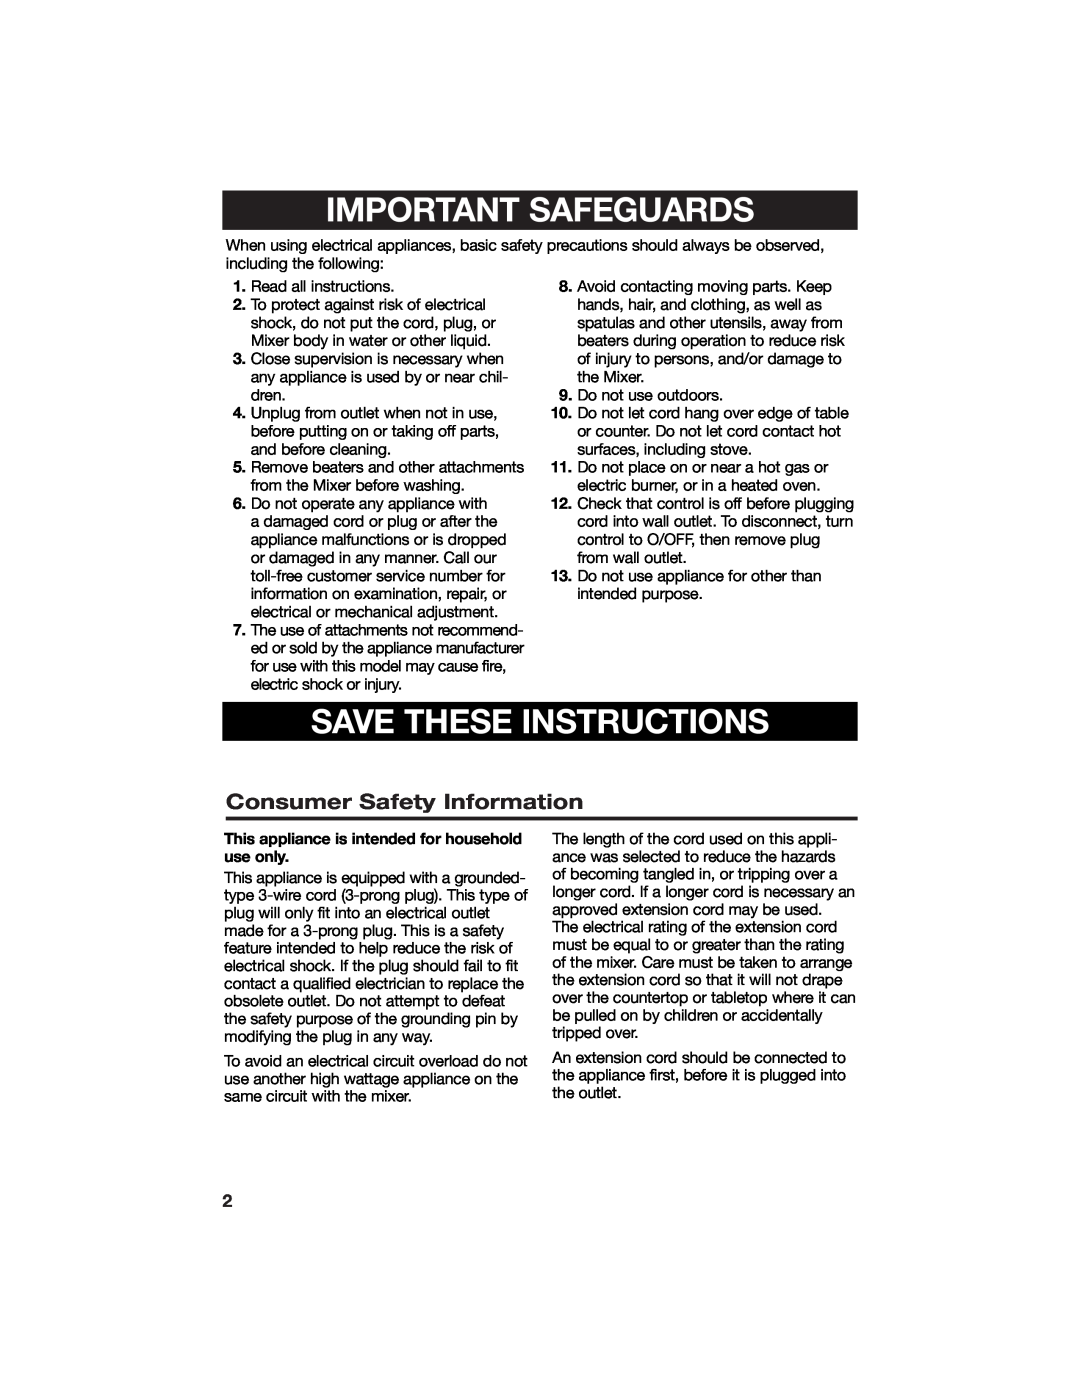 Hamilton Beach 840125800 manual Consumer Safety Information, Important Safeguards, Save These Instructions 